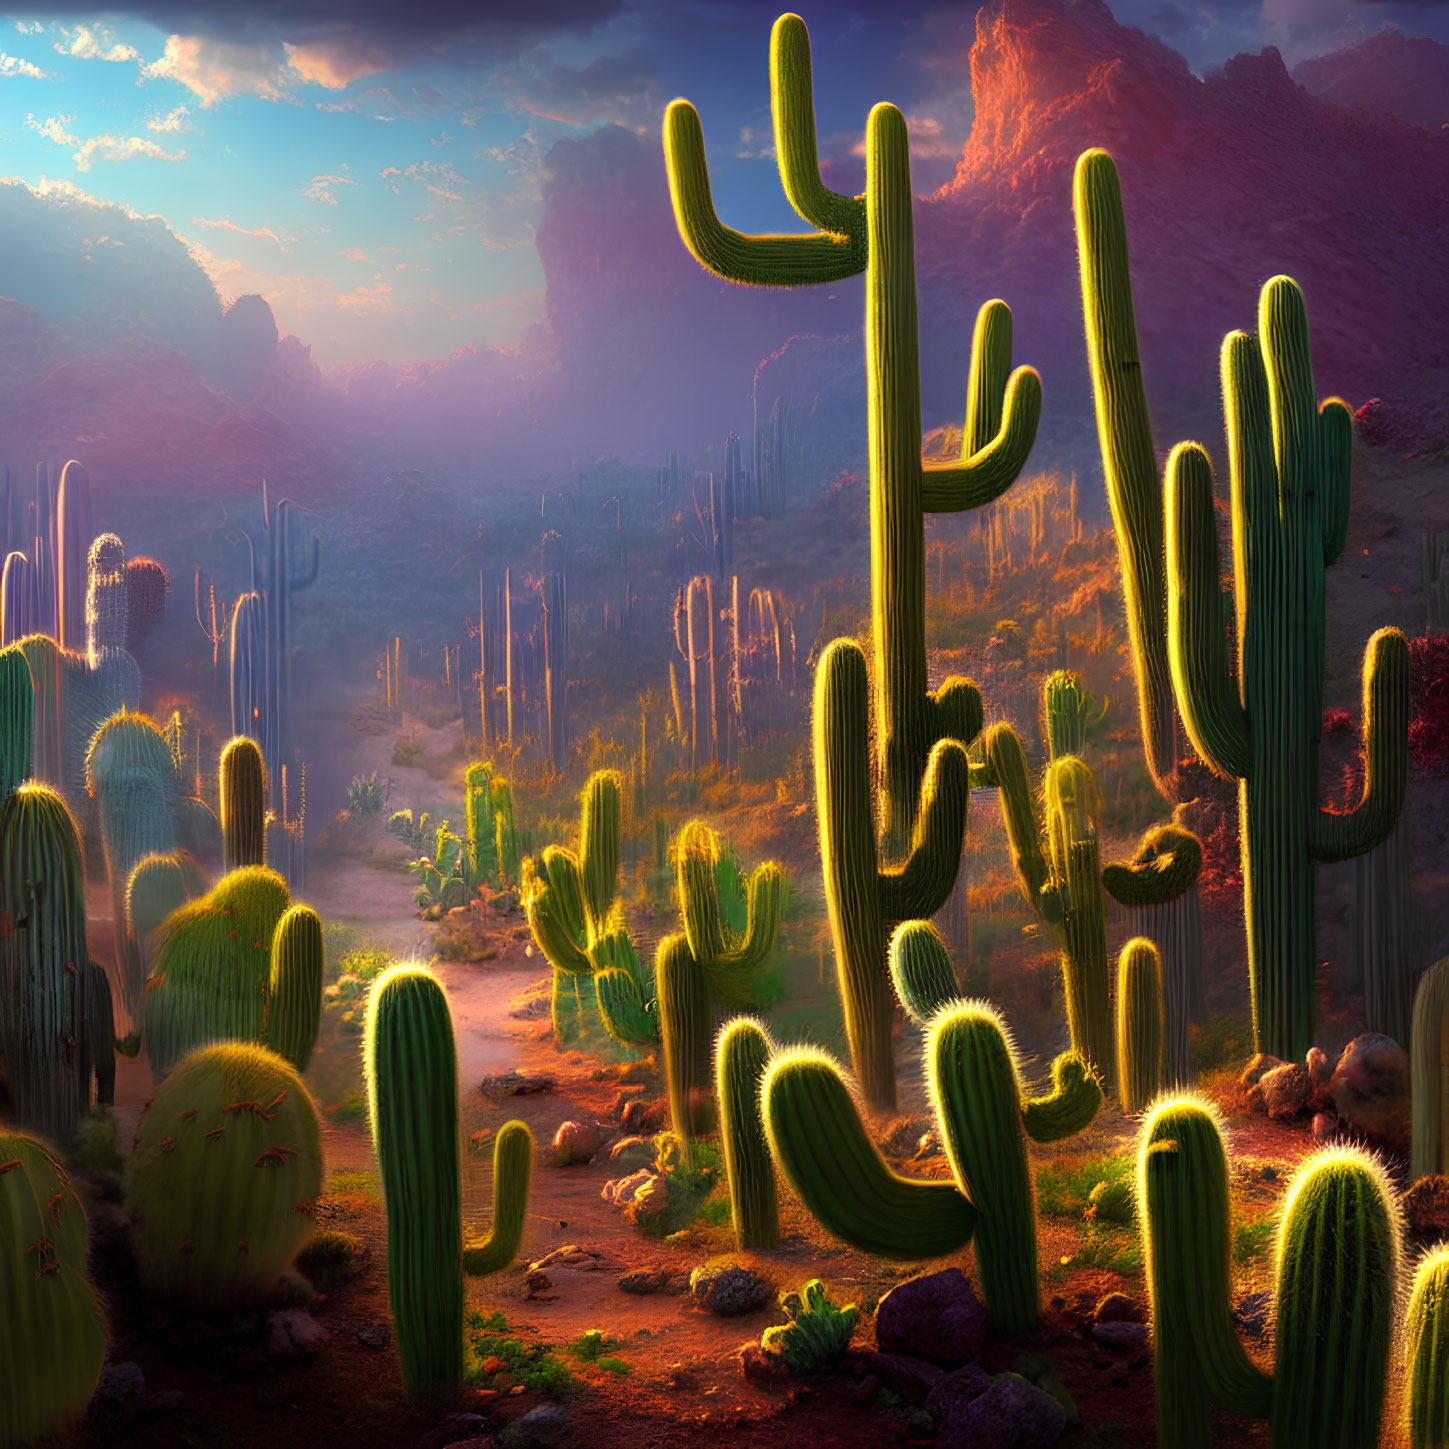 Vibrant desert sunrise with tall cacti and rugged mountains in hazy golden sky